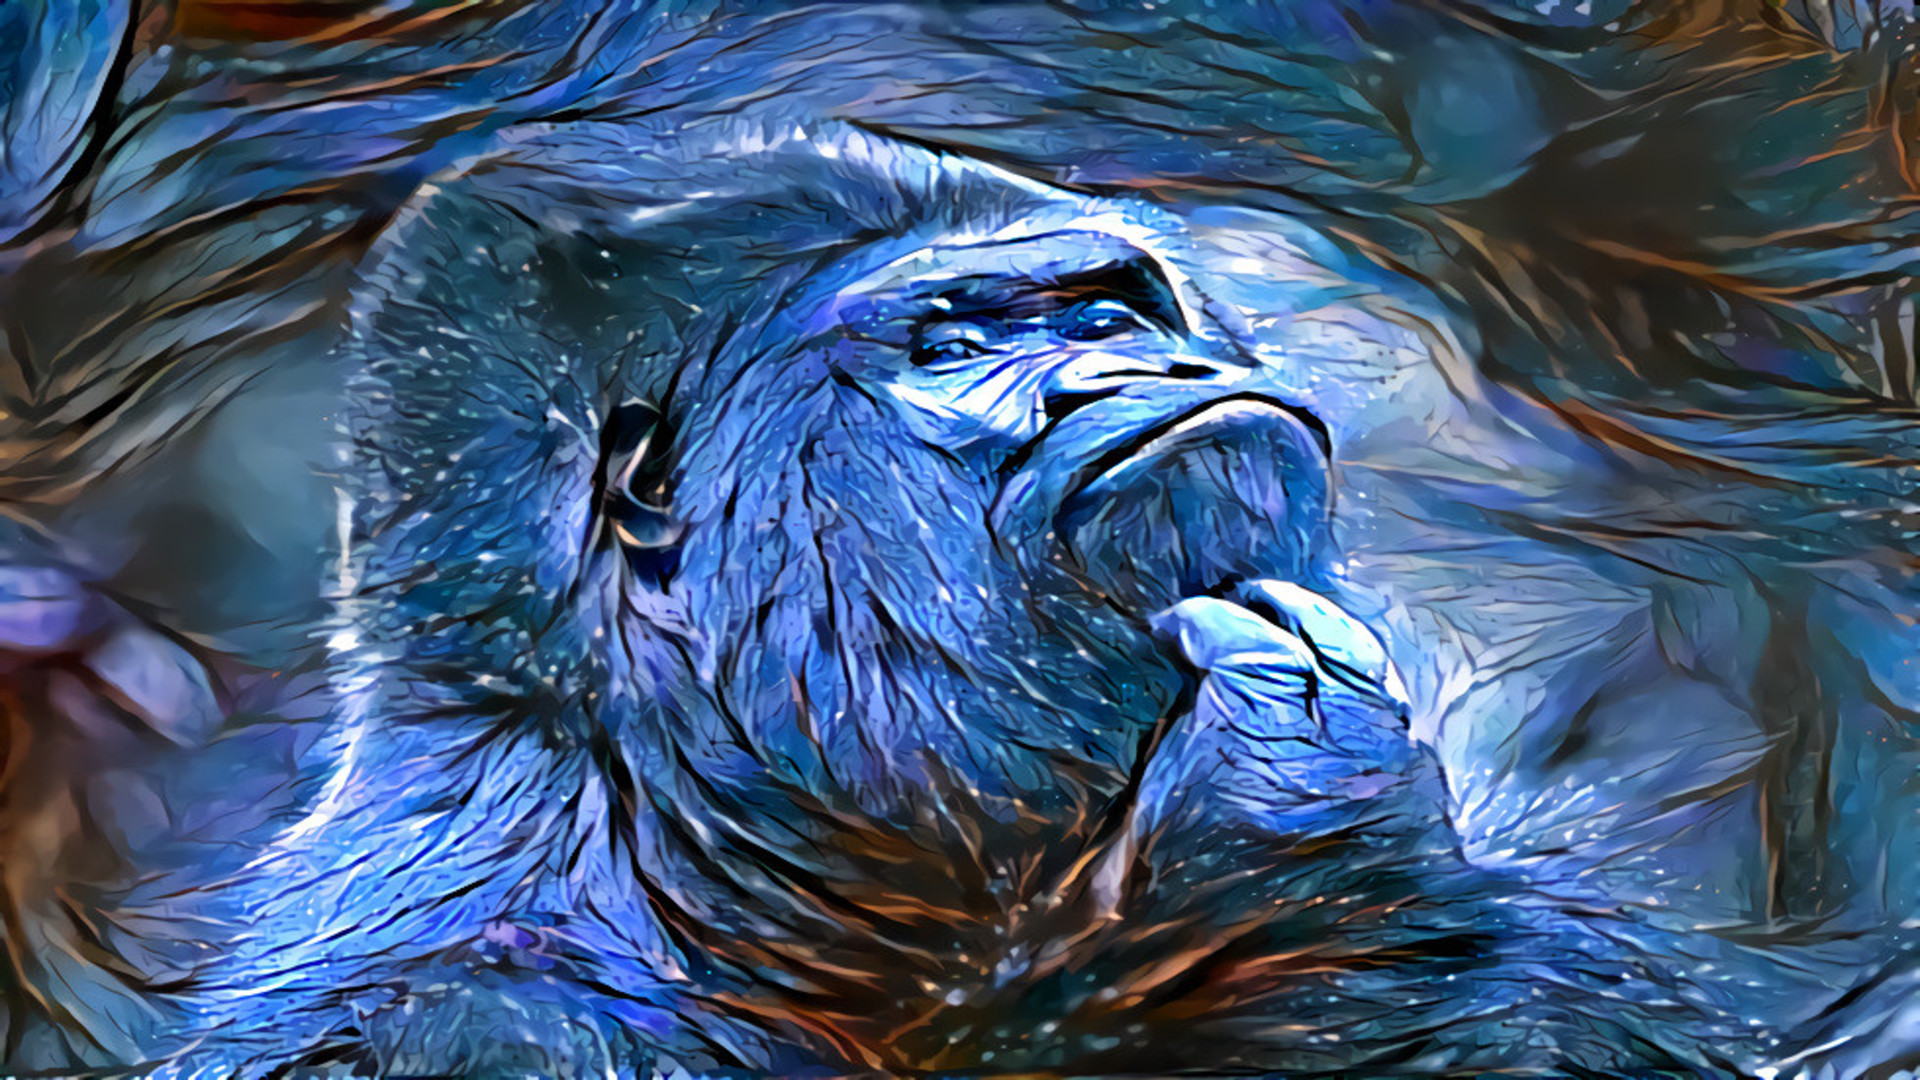 This is a creative piece of art which I created out of a simple gorilla image, hope u like it :) by NatureWorshiper